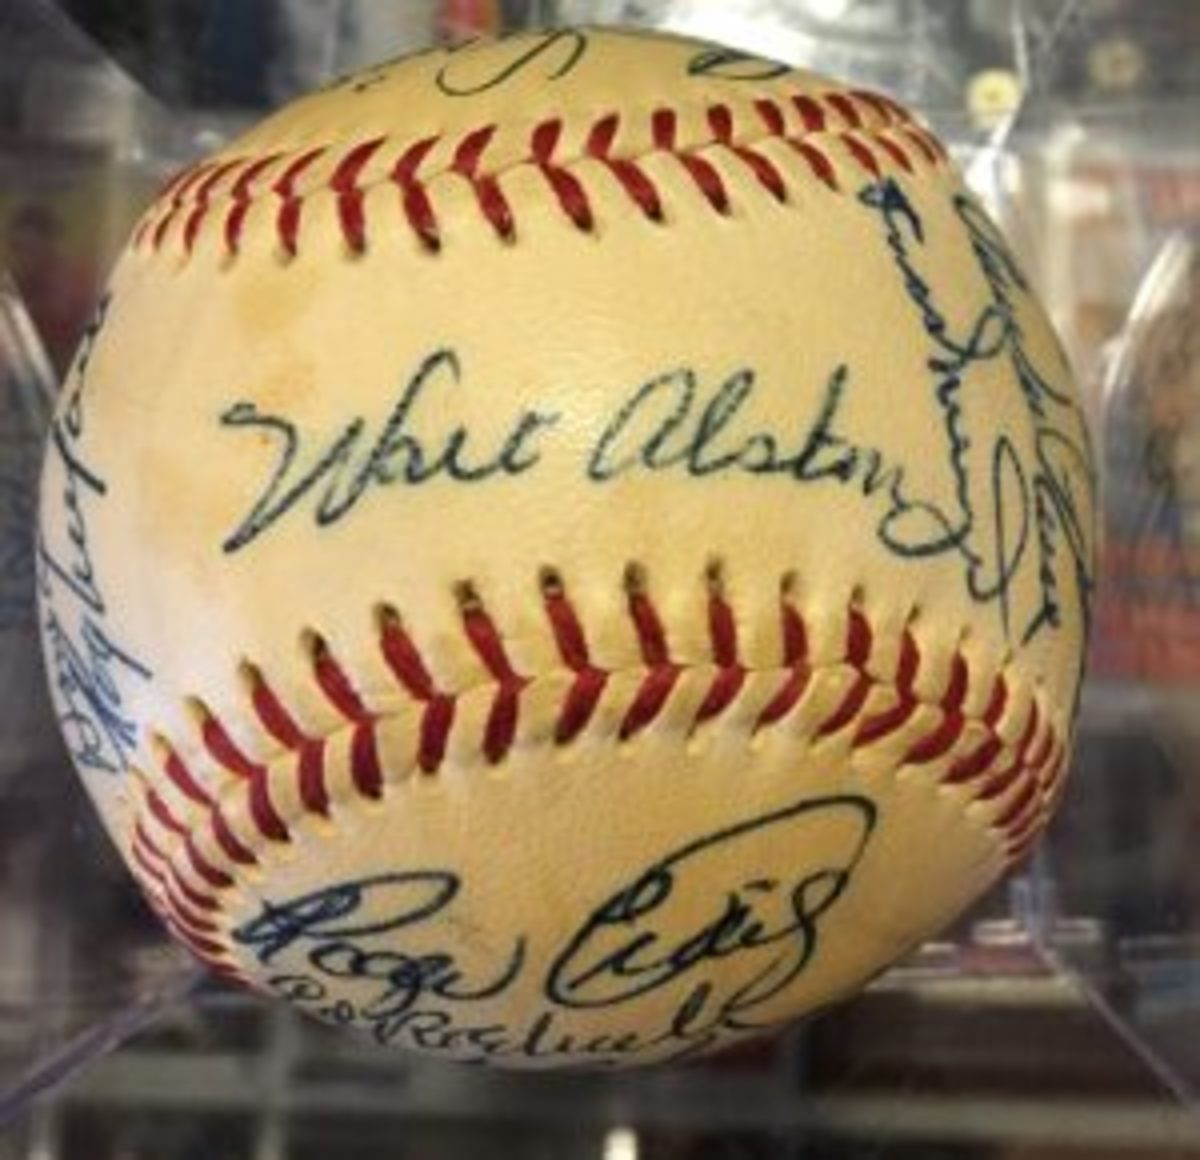 dodgers-signed-ball-web